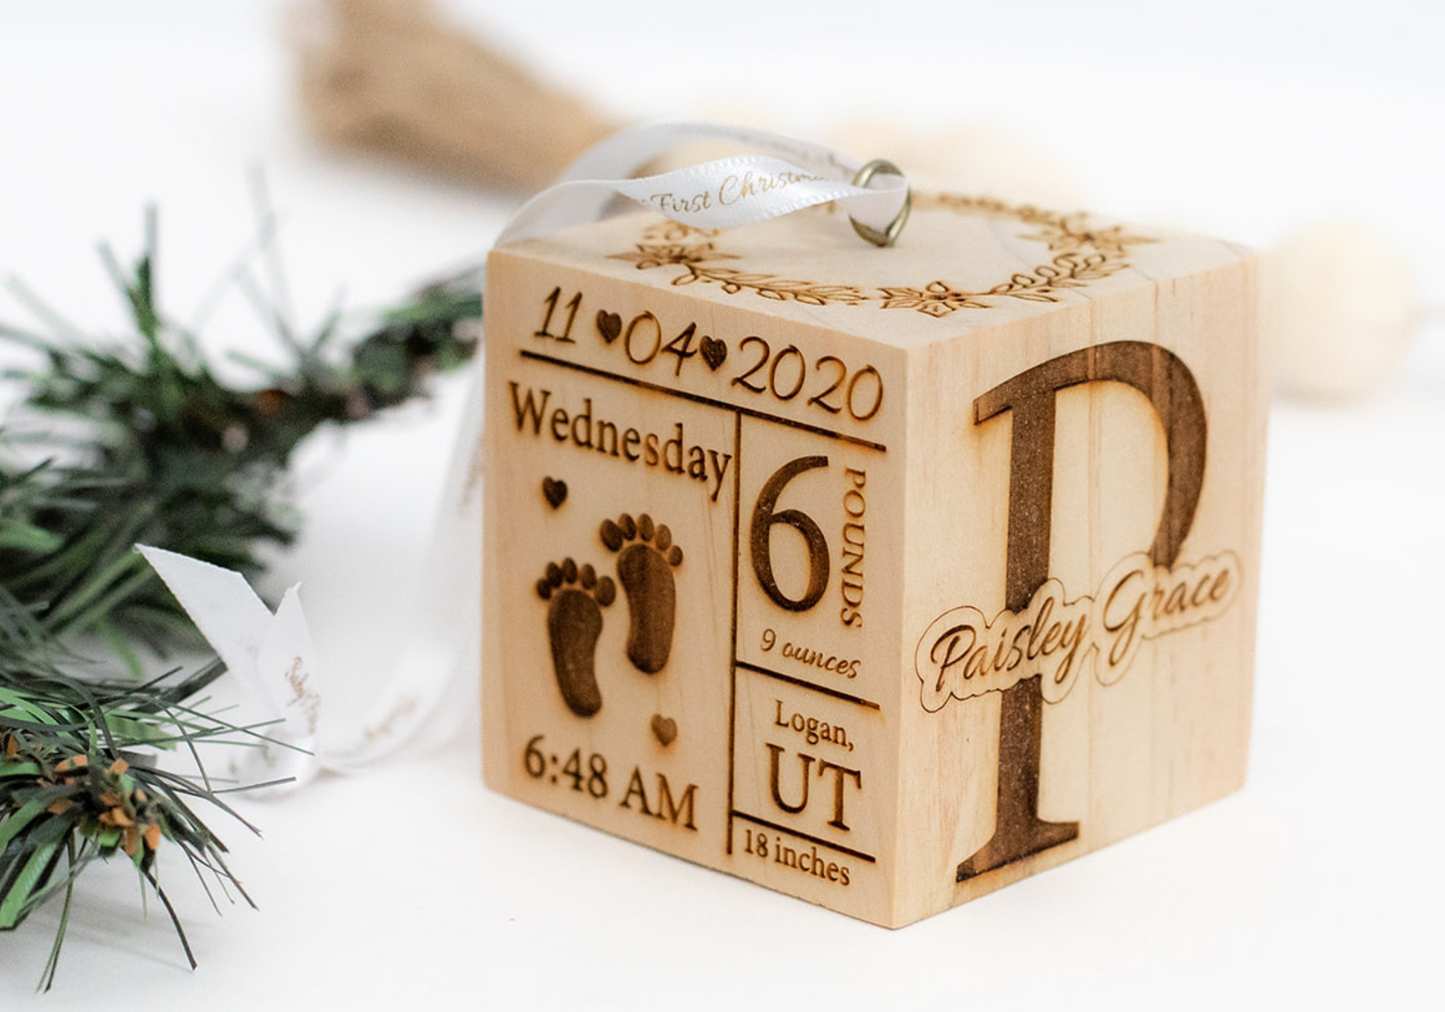 2.5" Woodland Baby's First Christmas Ornament Wooden Block